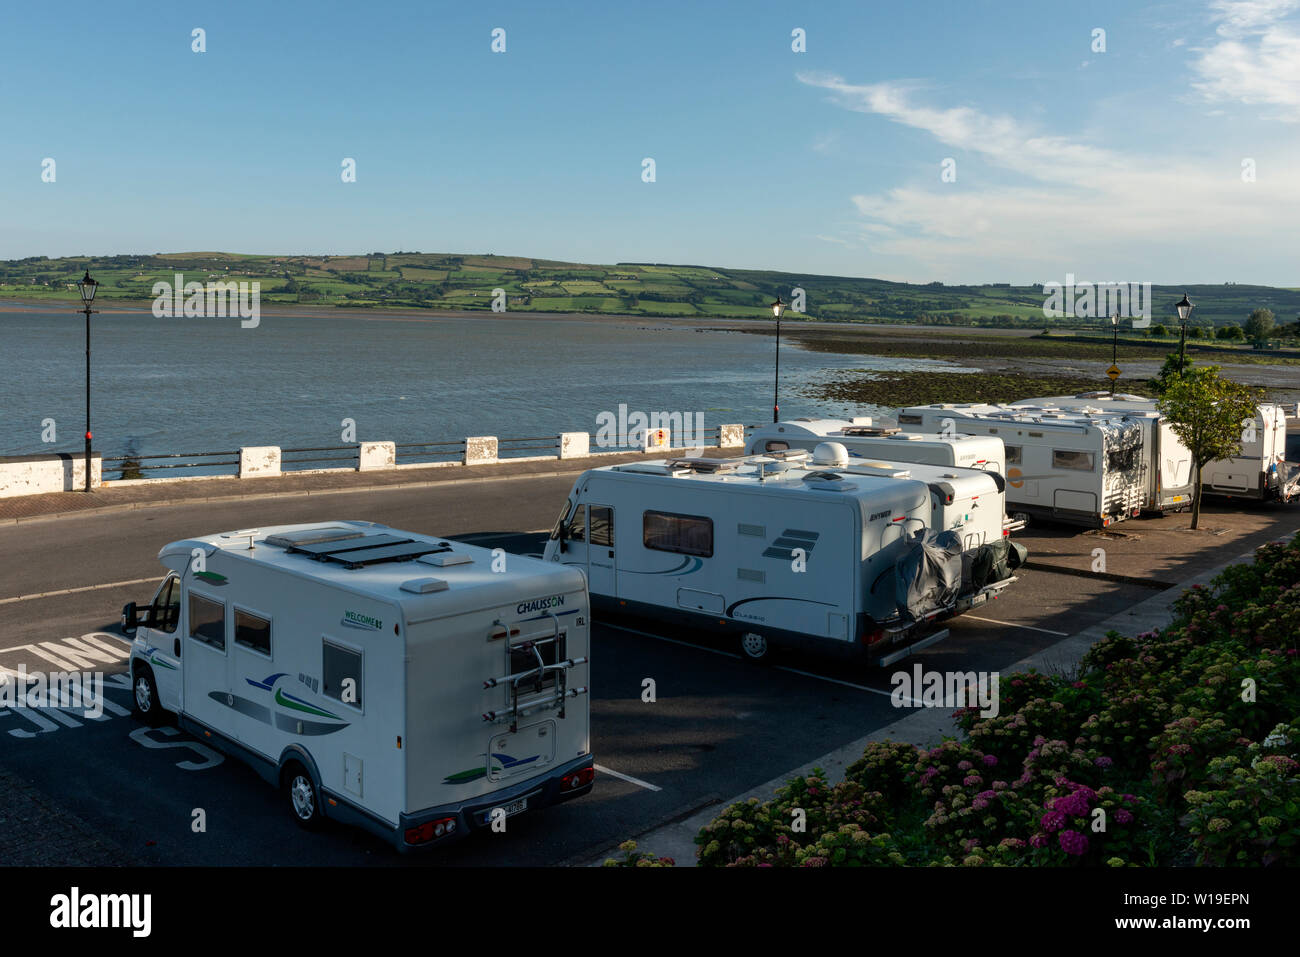 Caravan park. Caravans parked near Dungarvan Park at the mouth of Colligan River in area designated for coaches in Dungarvan, County Wexford, Ireland. Stock Photo